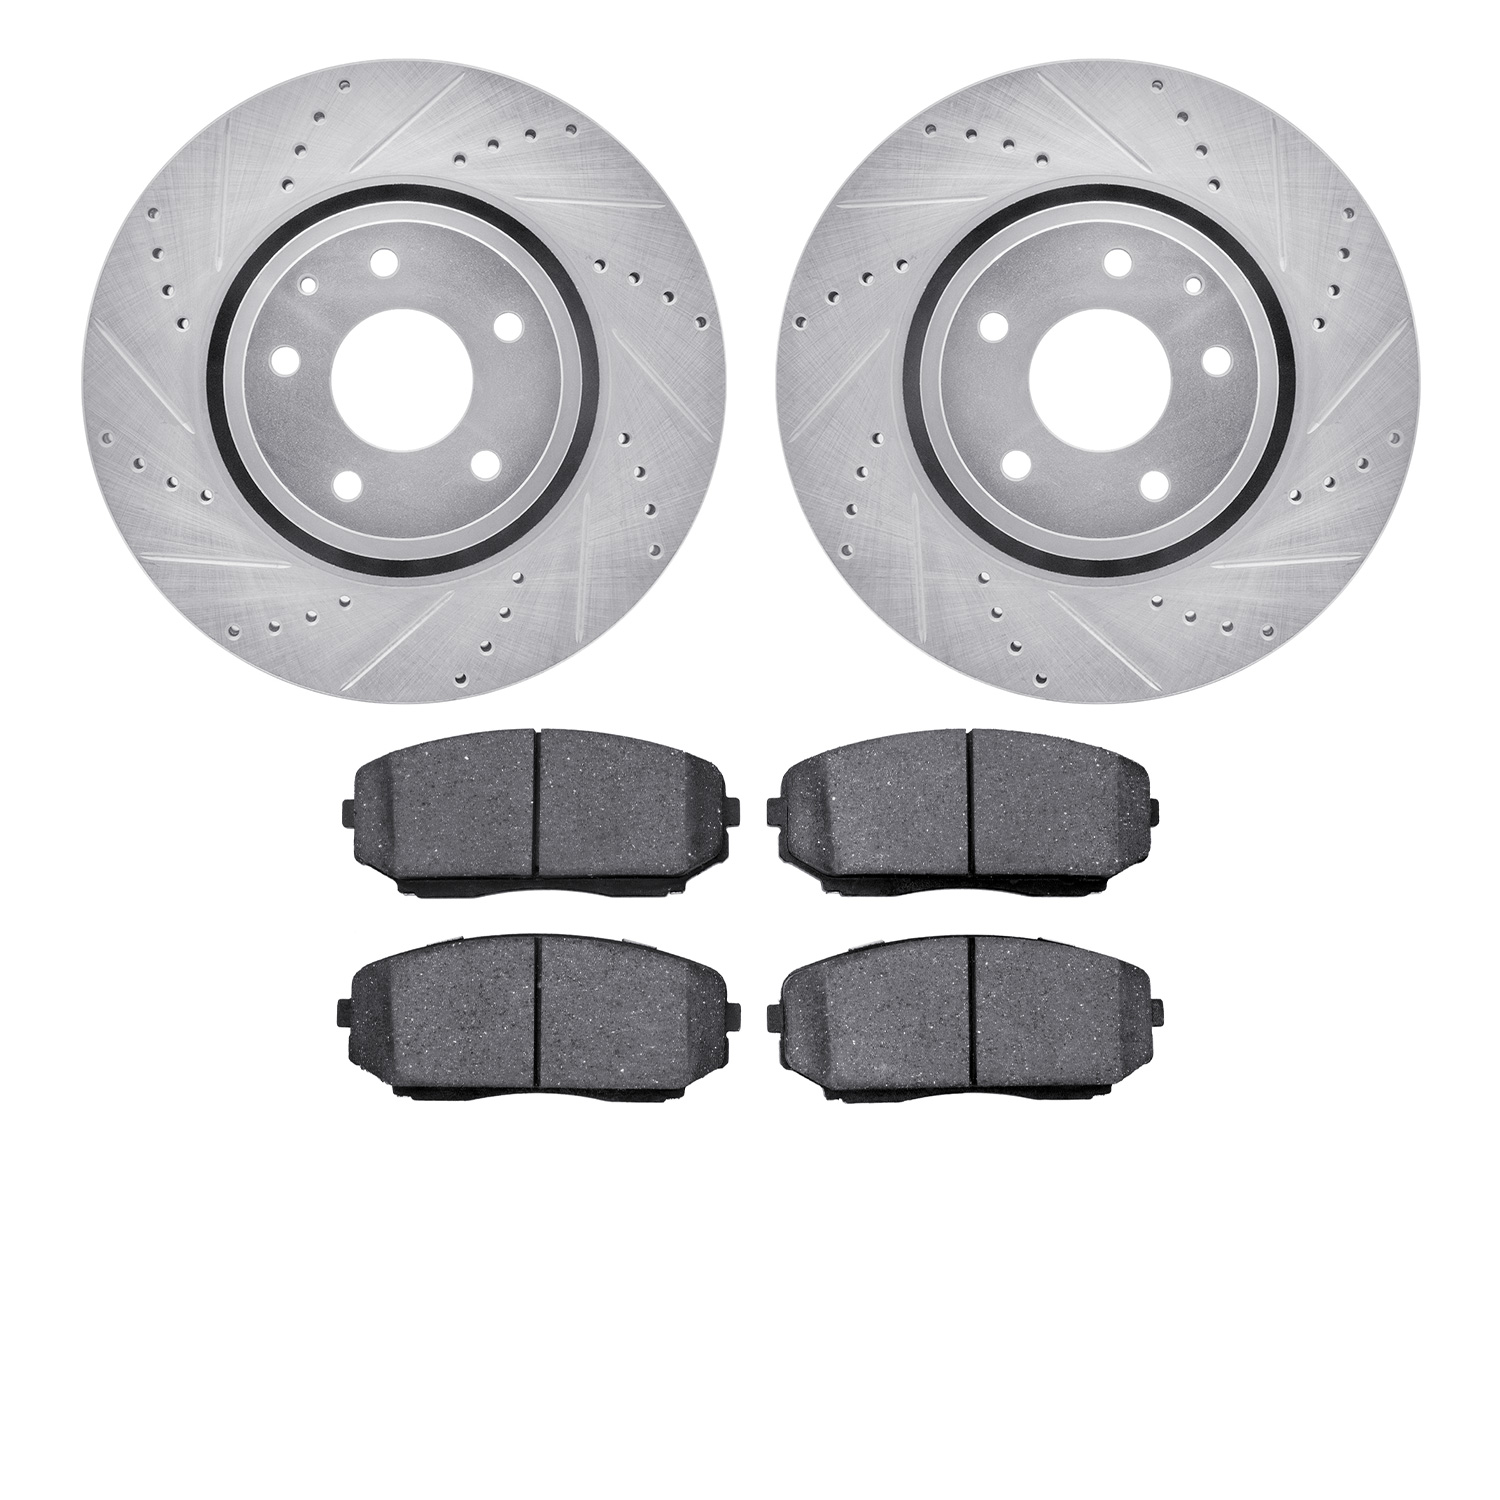 7502-80078 Drilled/Slotted Brake Rotors w/5000 Advanced Brake Pads Kit [Silver], Fits Select Ford/Lincoln/Mercury/Mazda, Positio